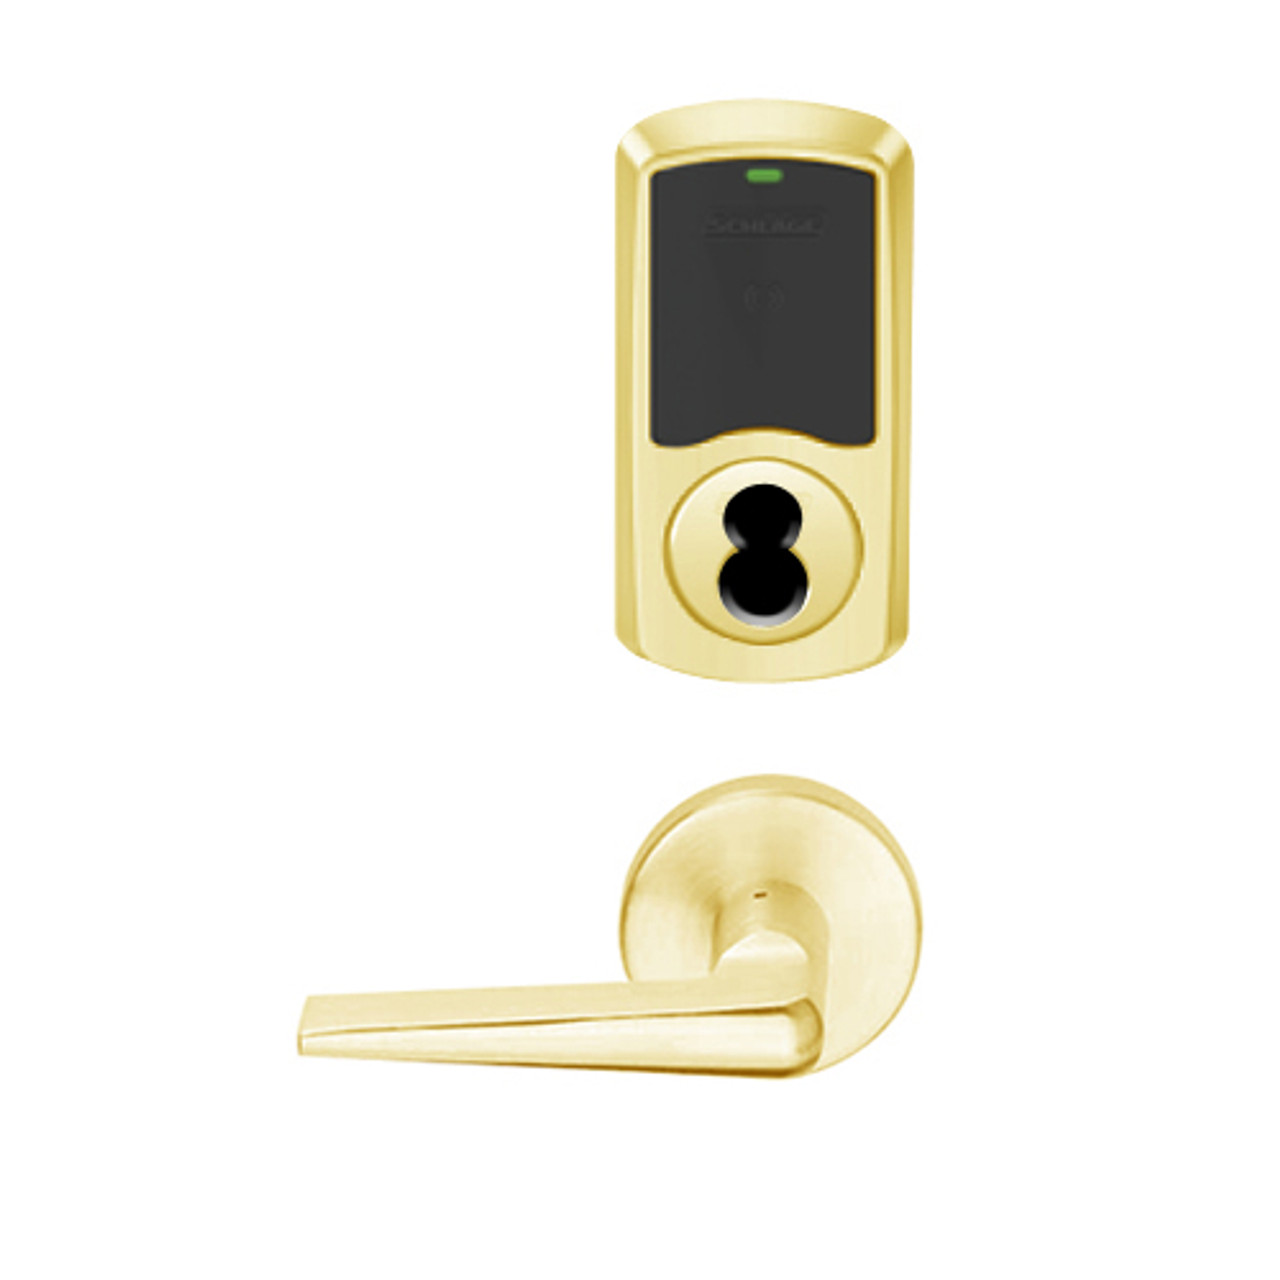 LEMS-GRW-J-05-605-00B Schlage Storeroom Wireless Greenwich Mortise Lock with LED Indicator and 05 Lever Prepped for FSIC in Bright Brass